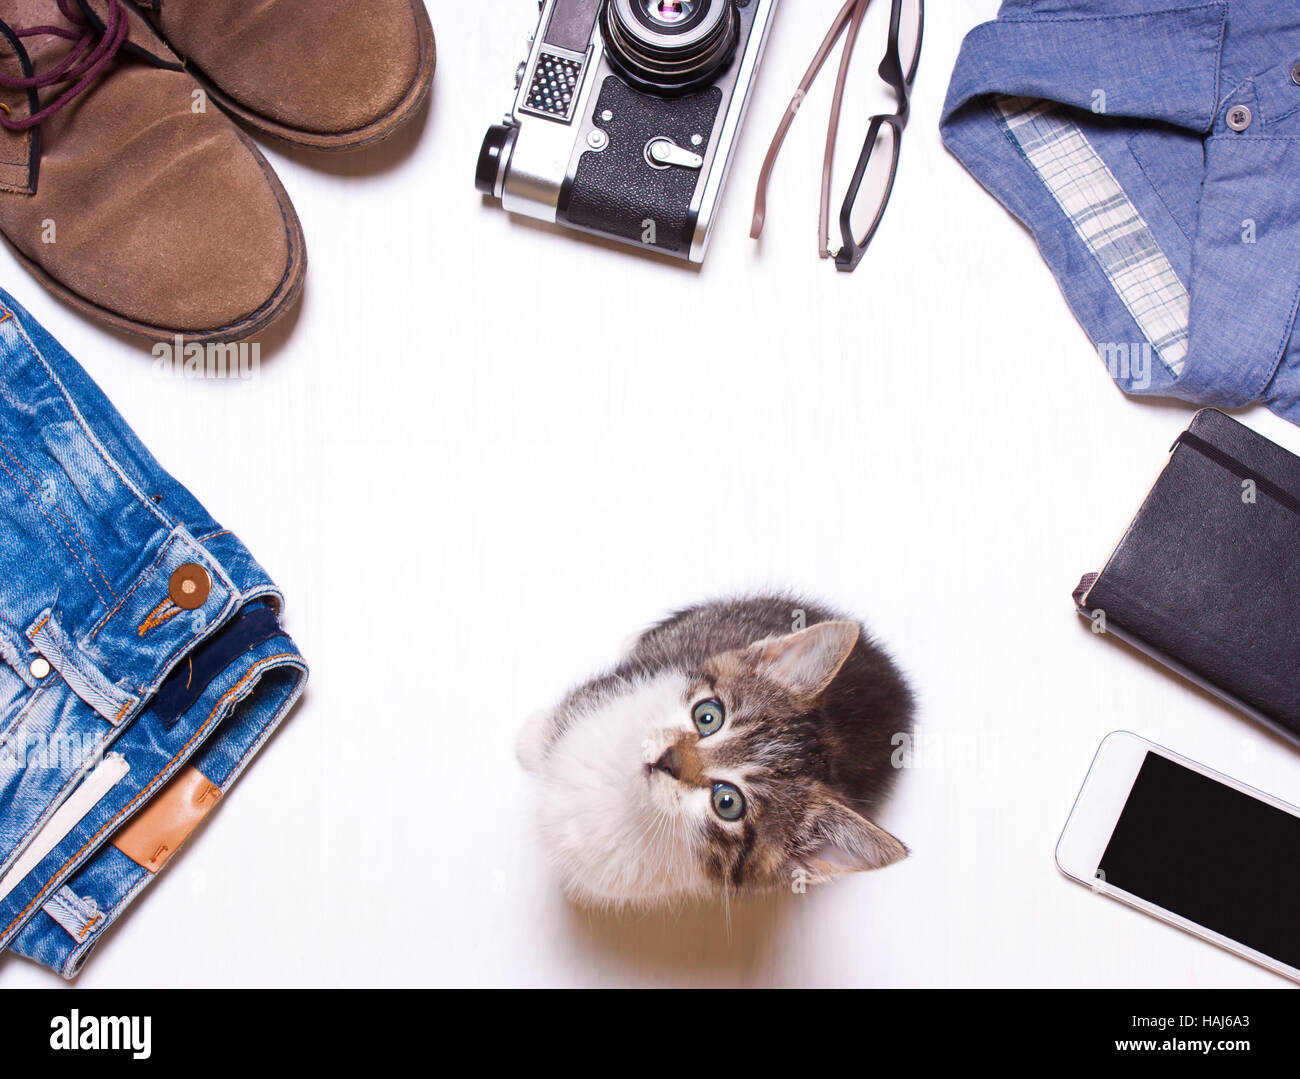 hipster ,men's clothes and accessories and cat.View from above with copy workspace.Look,collage menswear. Stock Photo